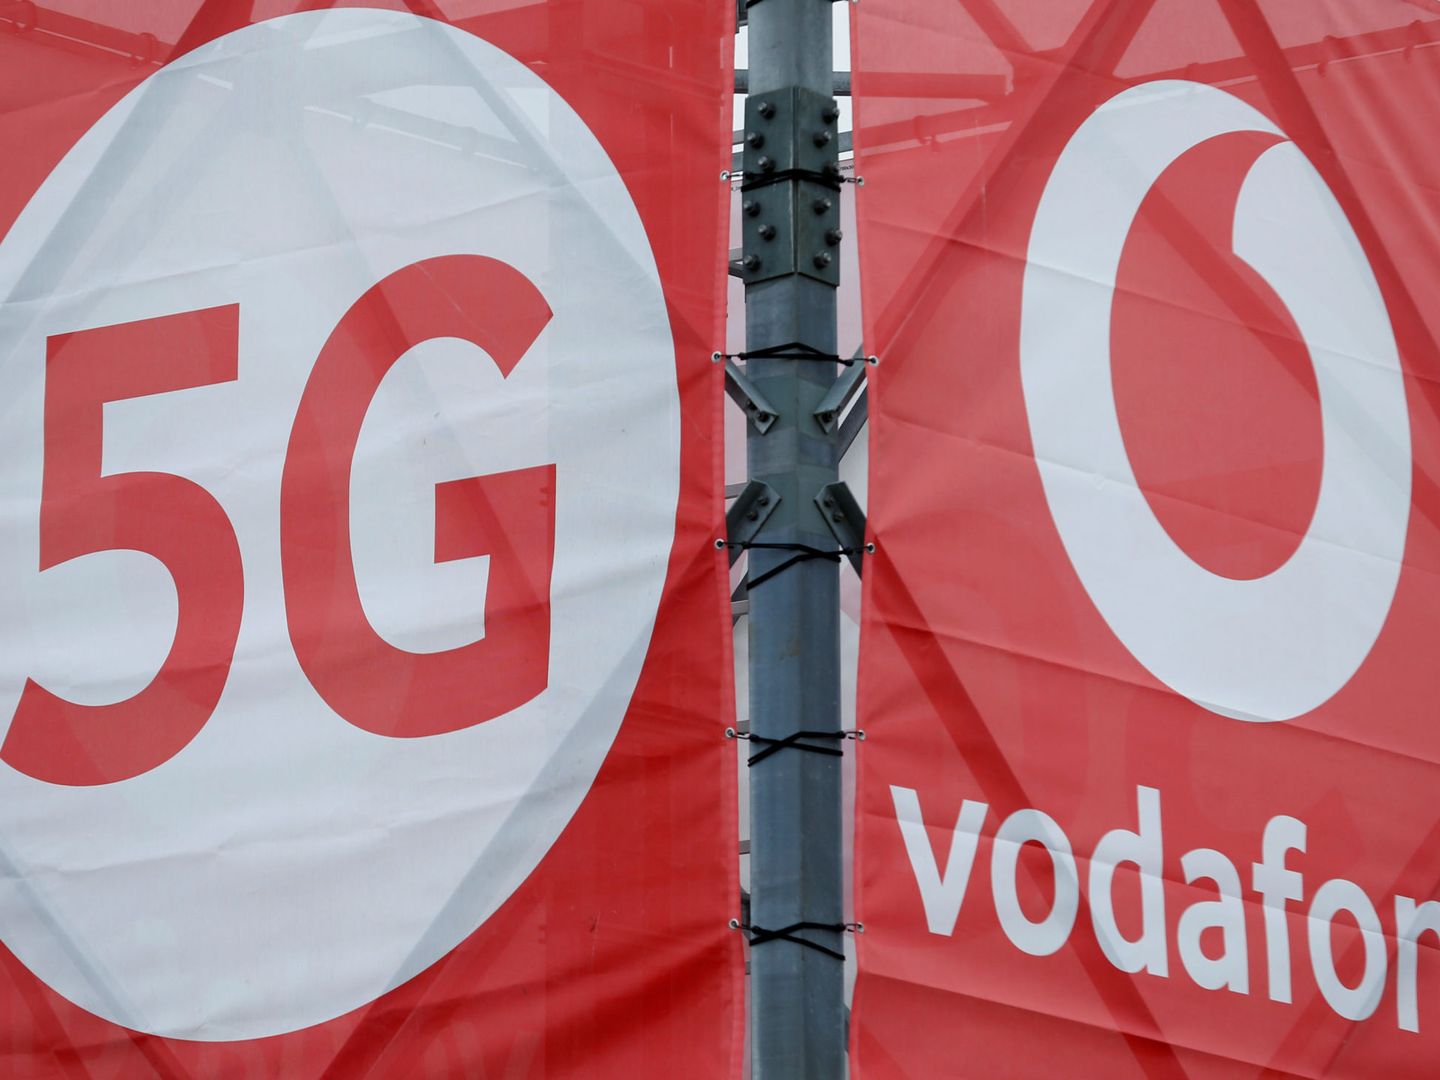 FILE PHOTO: Logos of 5G technology and telecommunications company Vodafone are pictured at the 5G Mobility Lab of Vodafone in Aldenhoven, Germany, November 27, 2018.REUTERS Thilo Schmuelgen File Photo